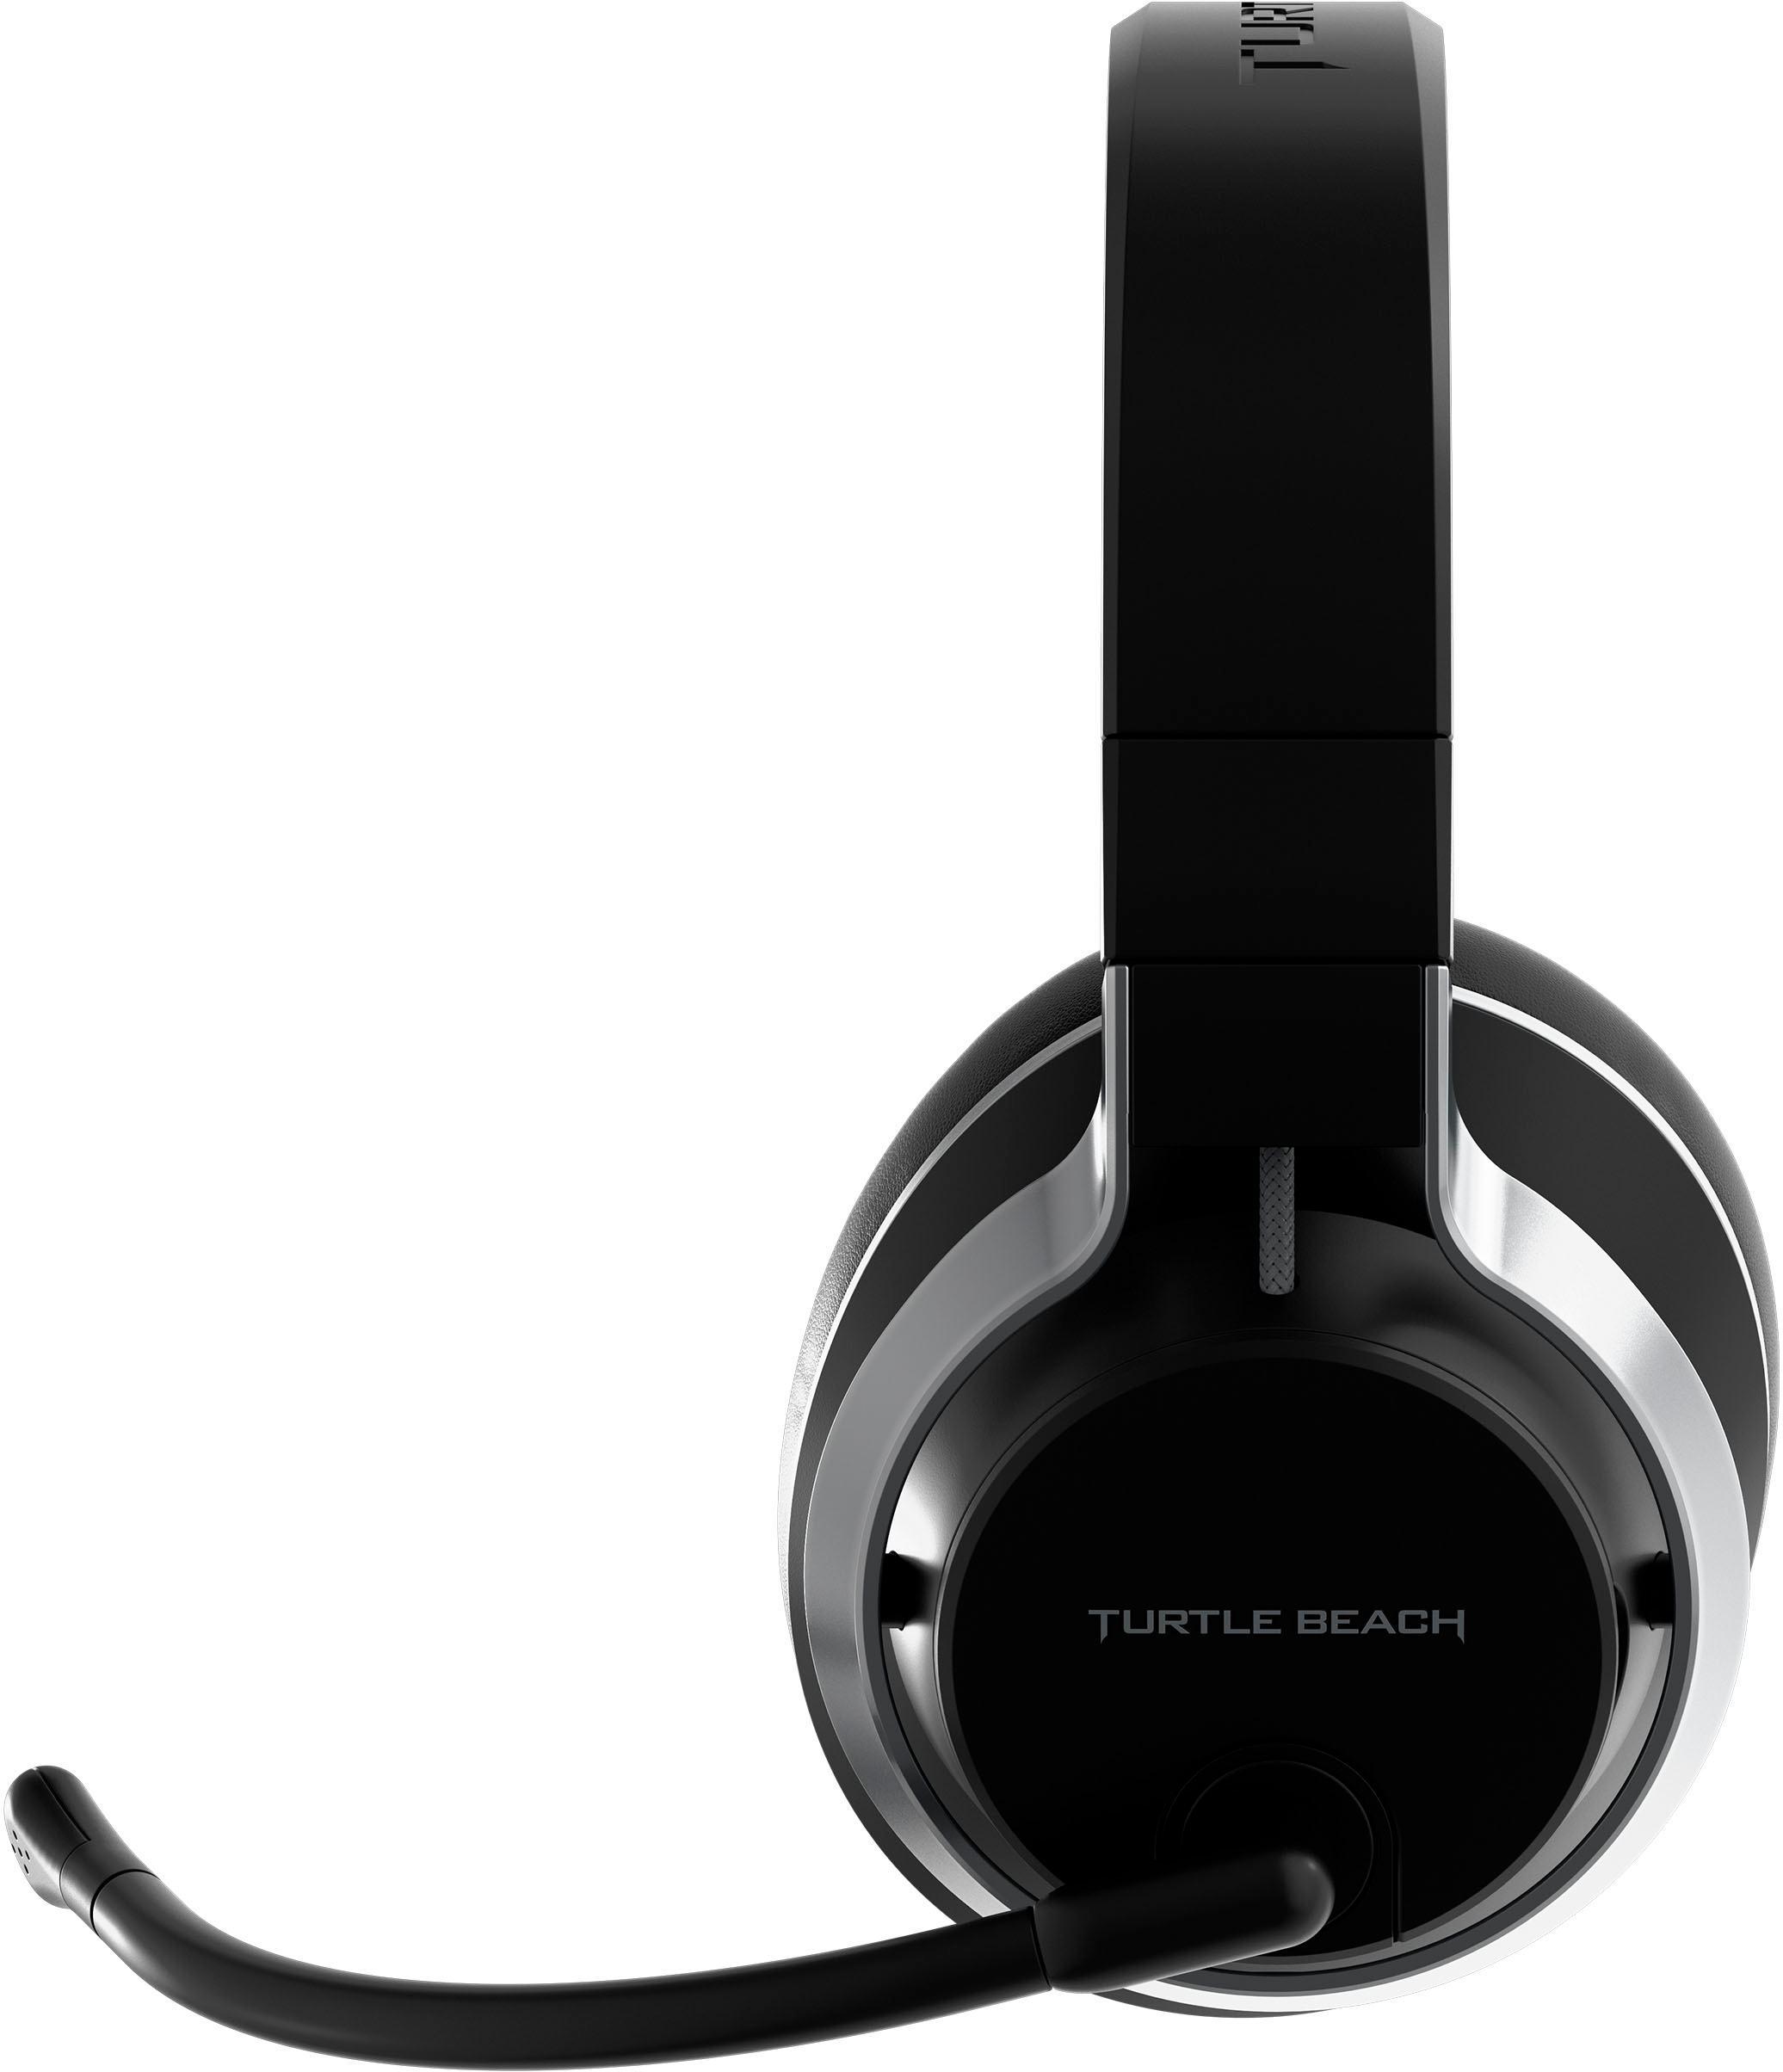 Turtle Beach Stealth Pro Best Gaming PS5, Black Buy Batteries for TBS-2360-01 and PC - Wireless PS4, Dual Switch, Headset Xbox Noise-Cancelling Xbox, Edition